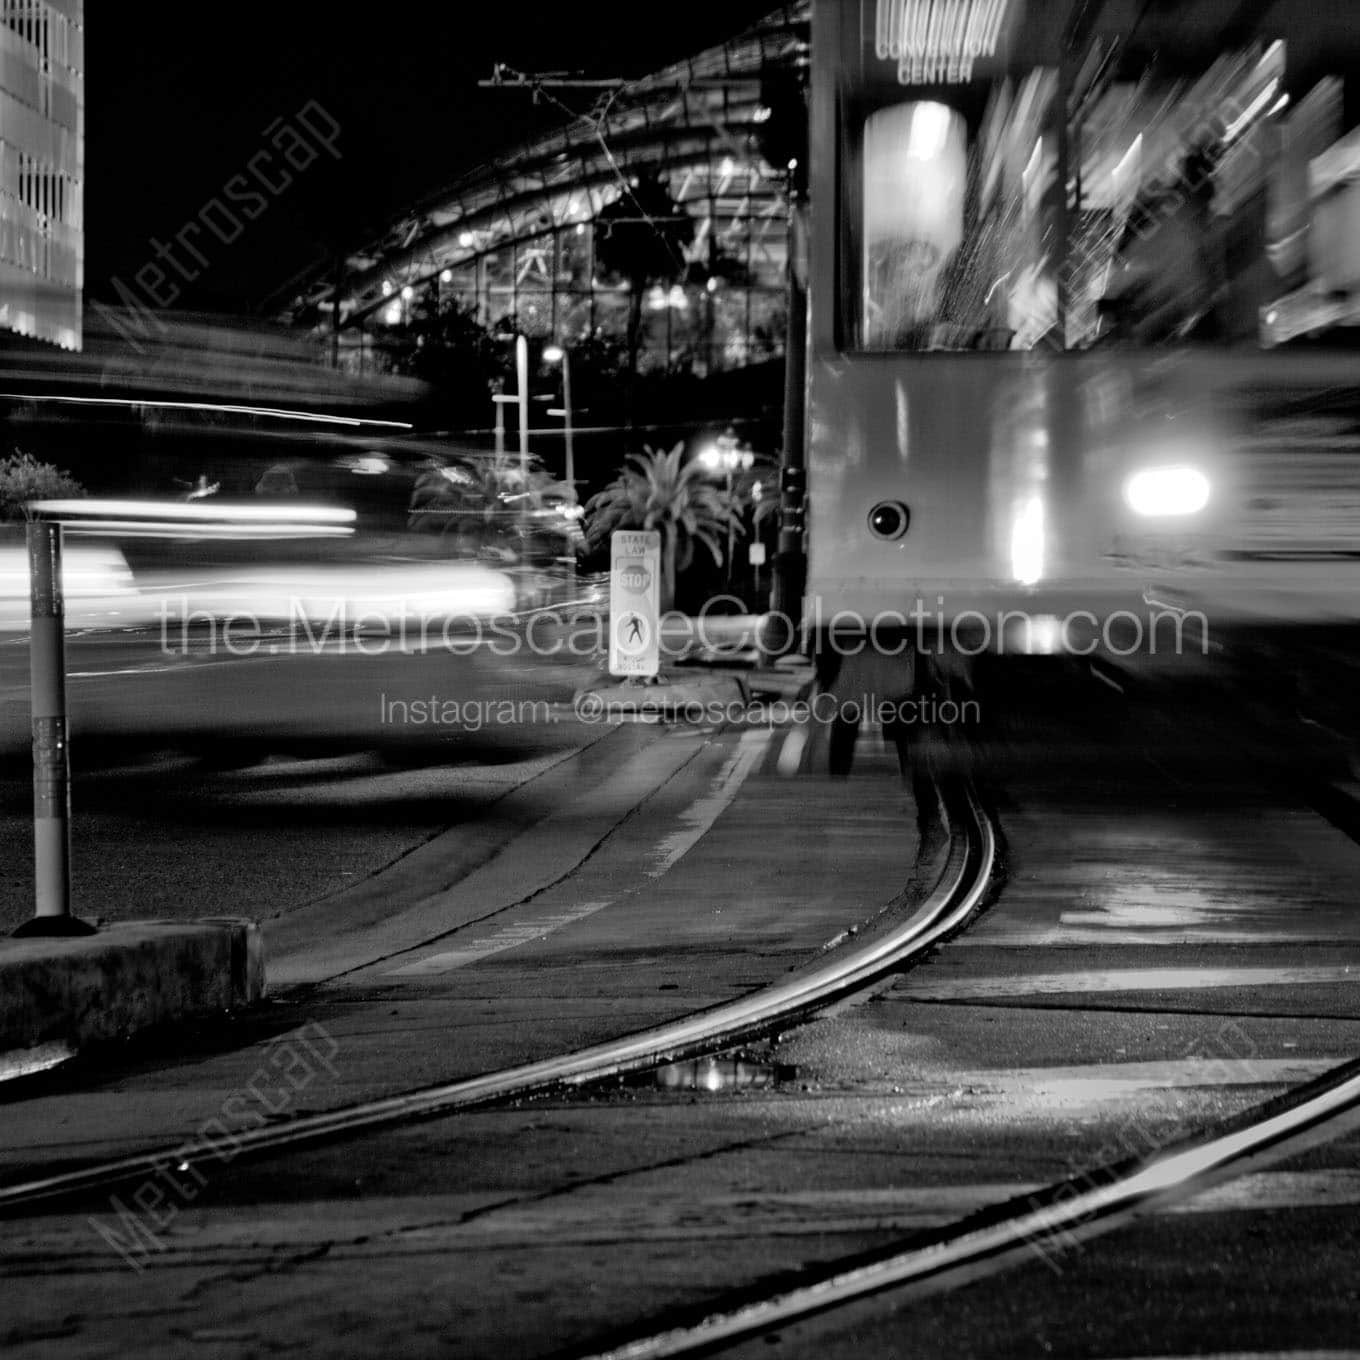 taxi and street car channelside Black & White Office Art